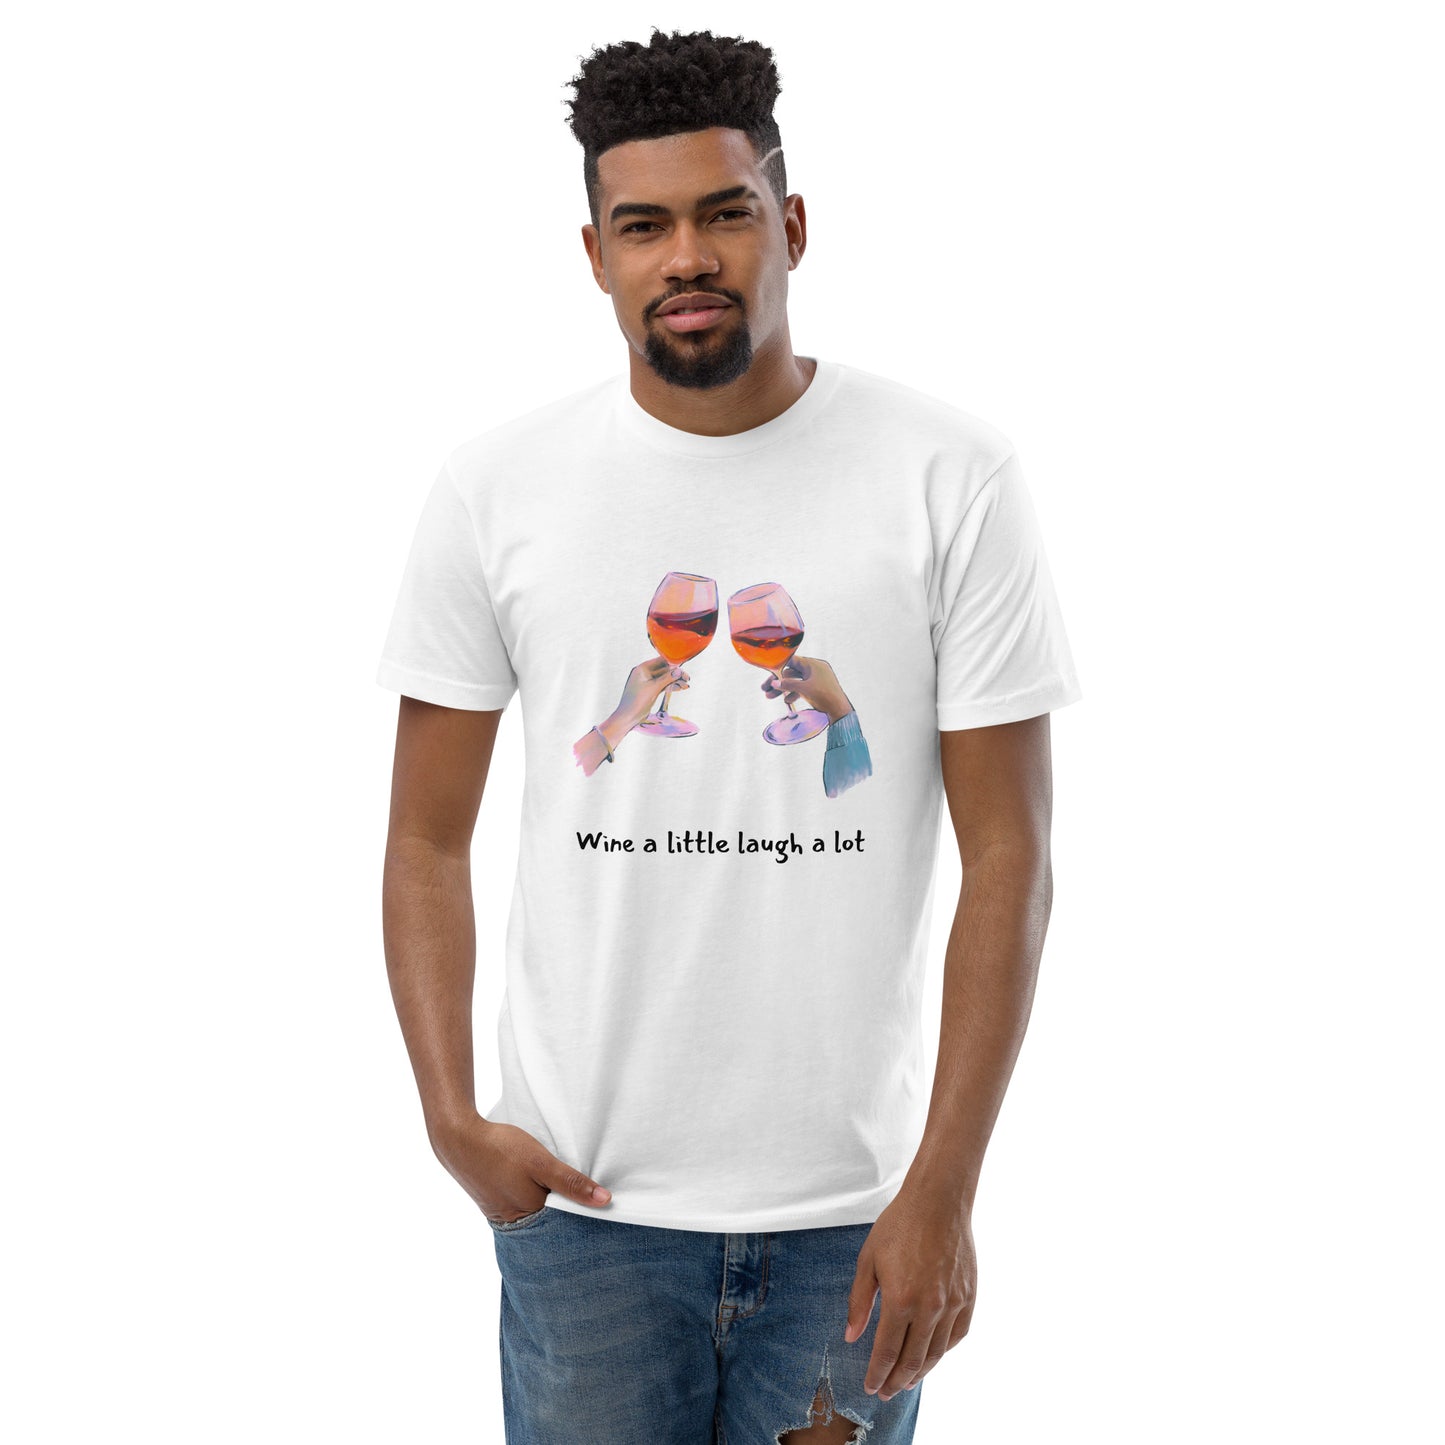 Wine a little laugh a lot - White Short Sleeve Tee